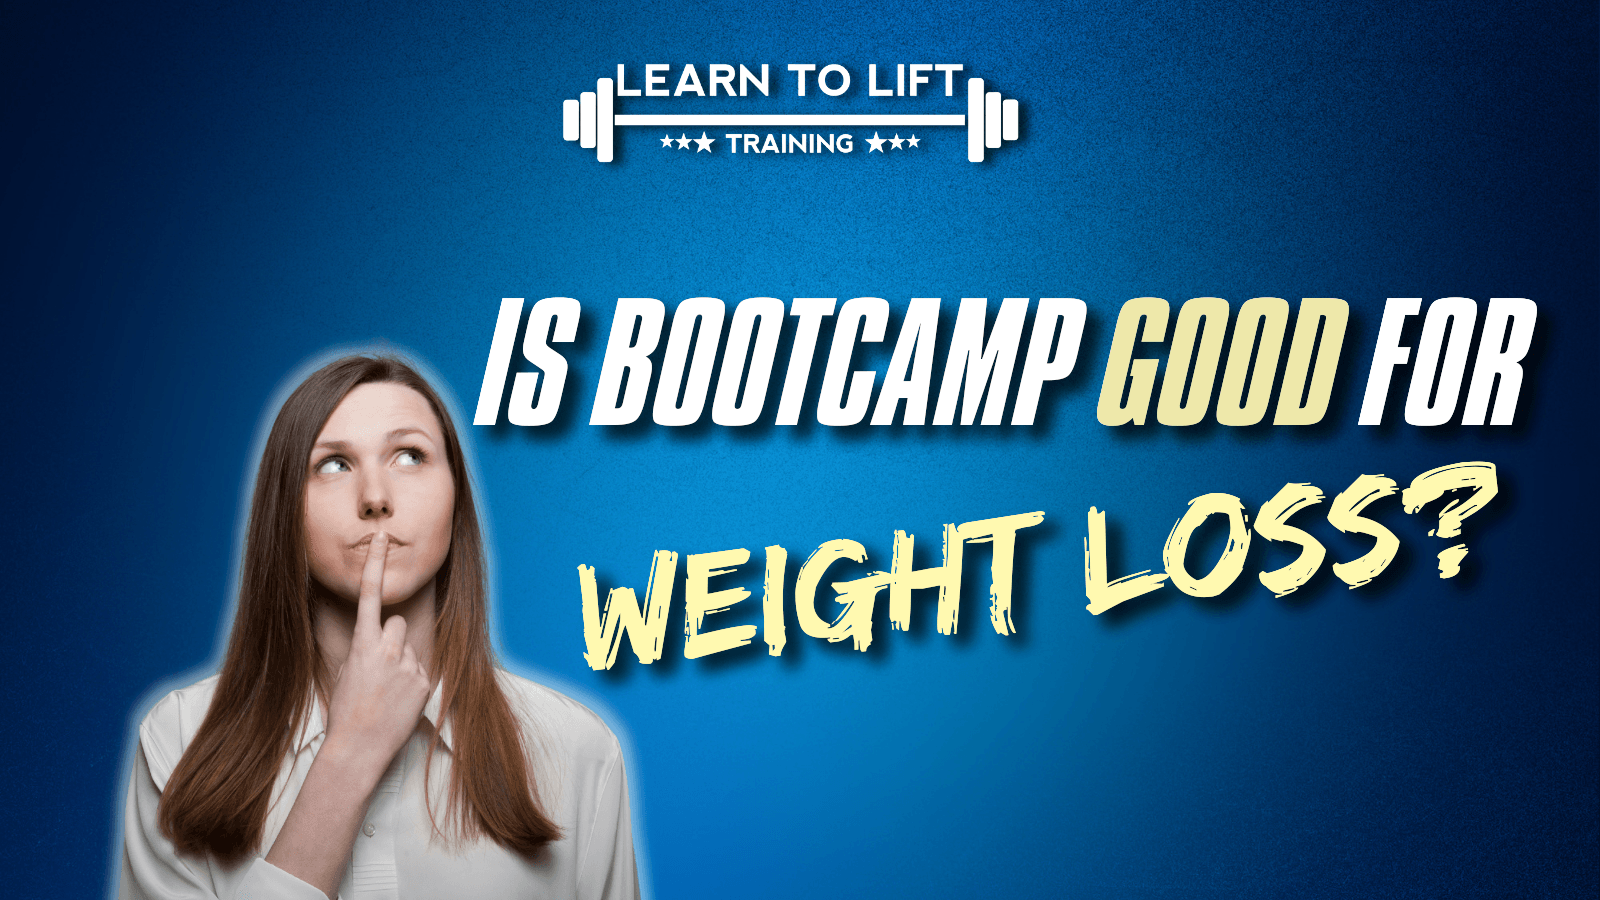 Glasgow Bootcamp - Is Bootcamp good for weight loss?